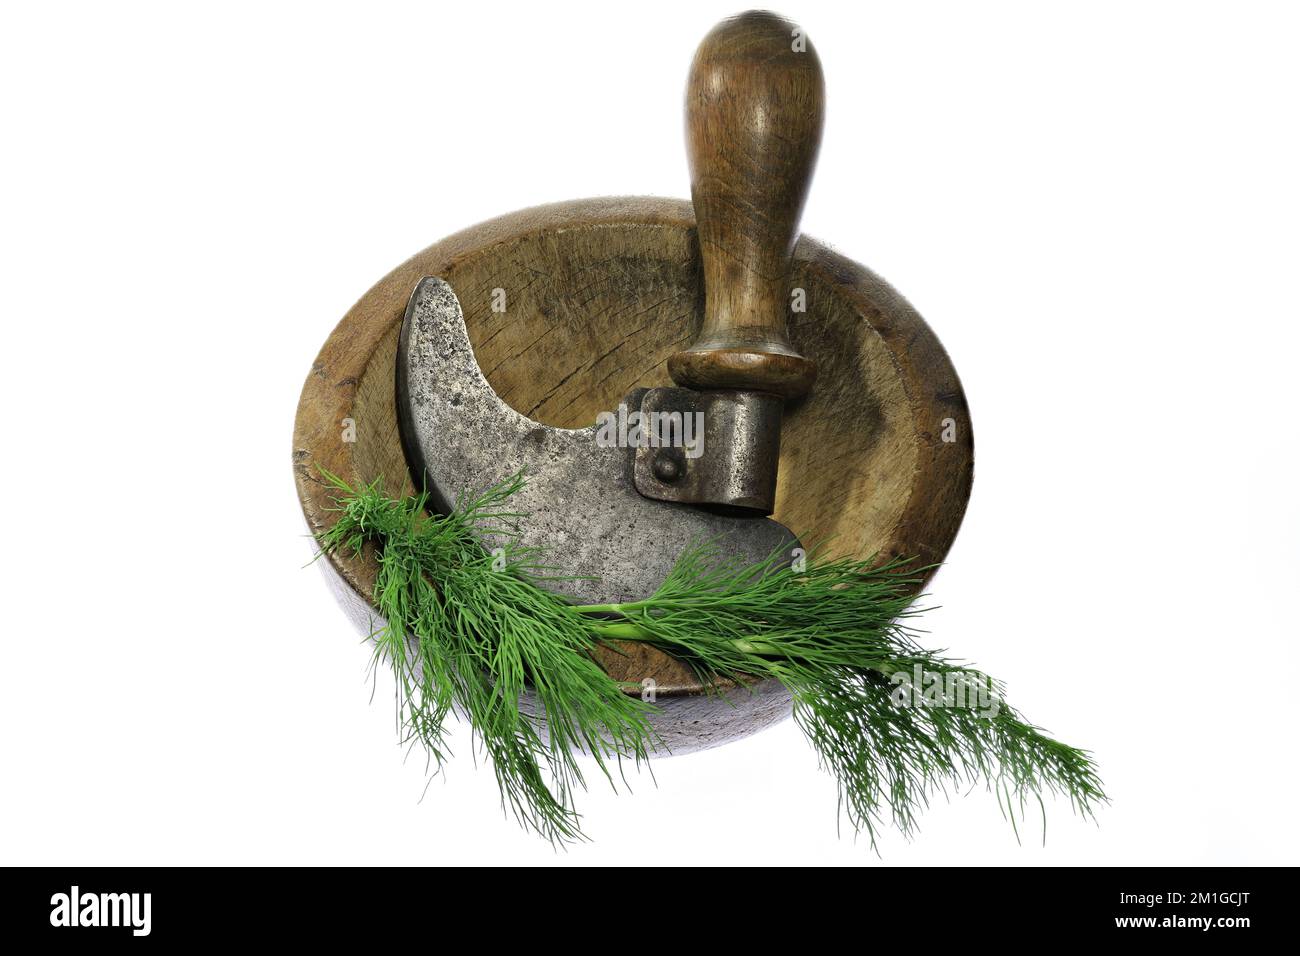 https://c8.alamy.com/comp/2M1GCJT/vintage-herb-chopper-with-fresh-dill-isolated-on-white-background-2M1GCJT.jpg